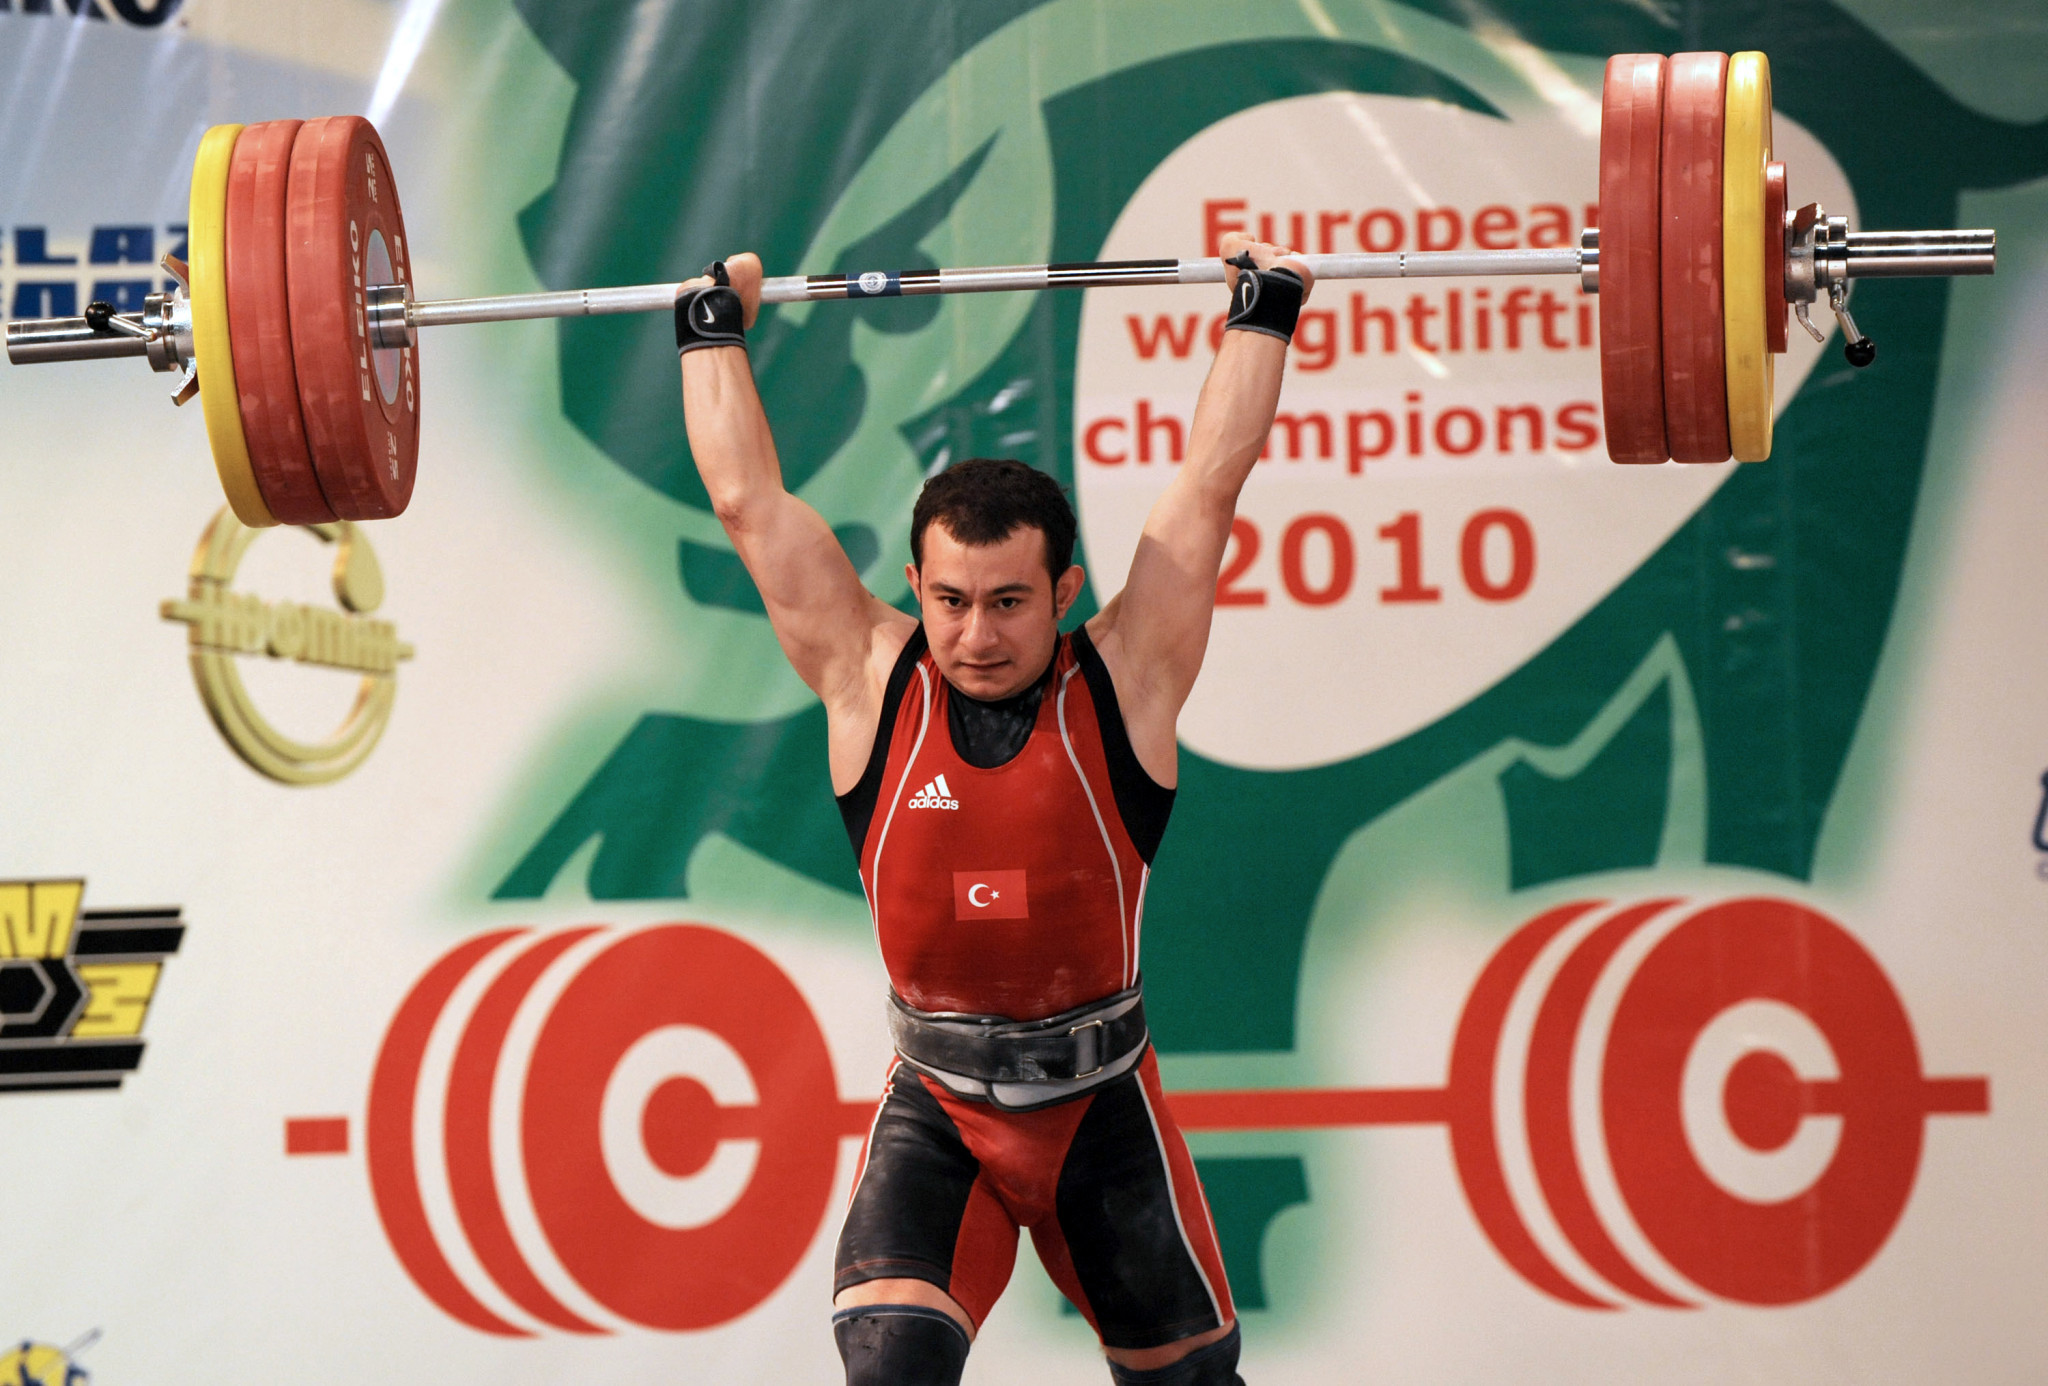 Turkish weightlifter Bilgin has result from London 2012 wiped for doping